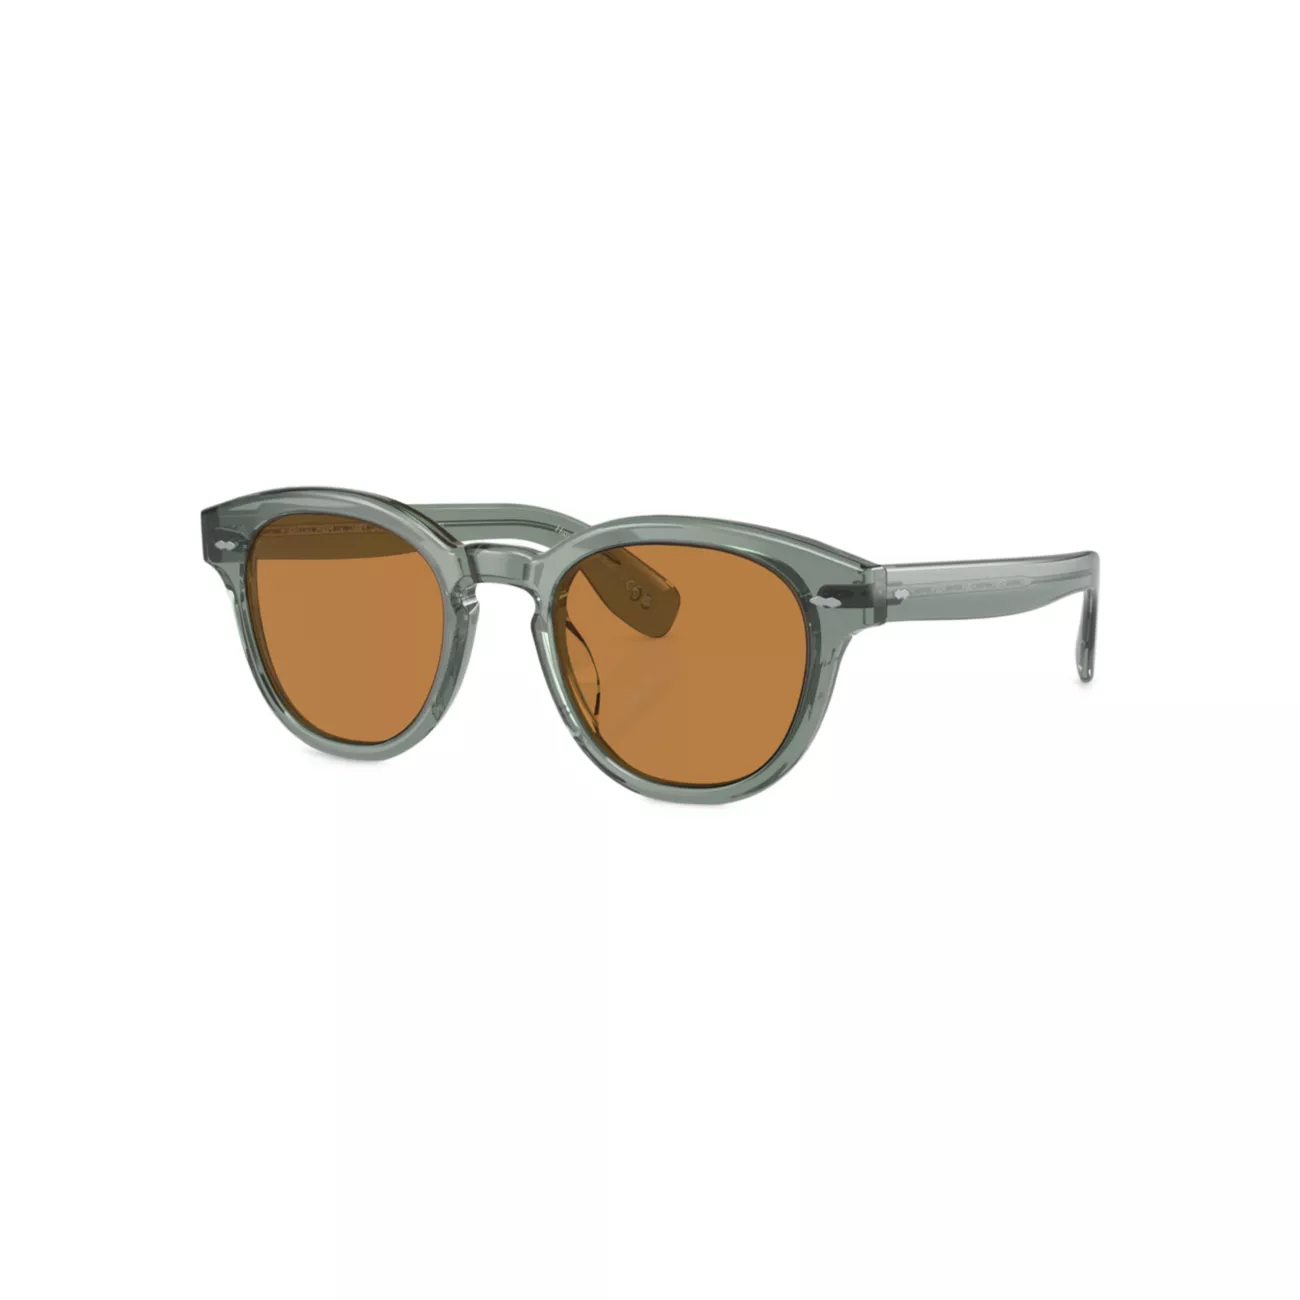 Cary Grant Pillow 50MM Round Sunglasses Oliver Peoples